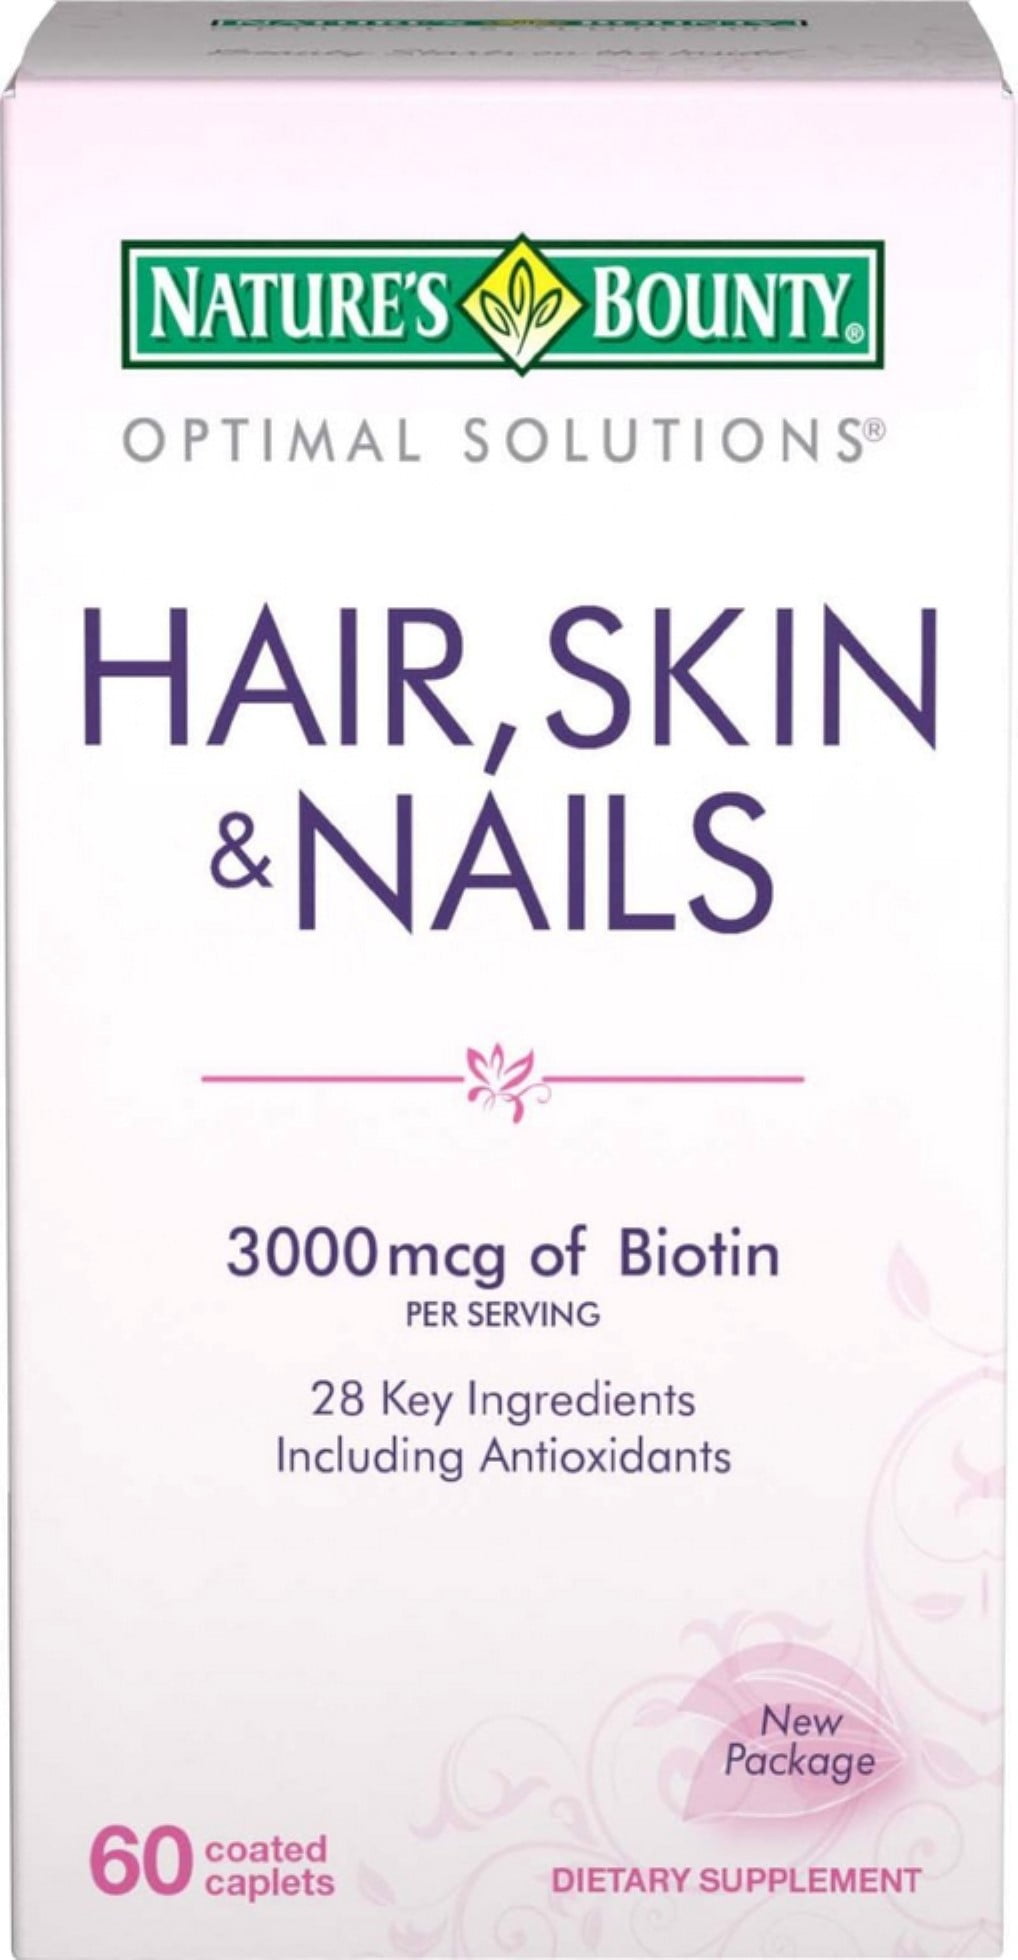 Nature's Bounty Hair, Skin and Nails Caplets 60 ea (Pack of 2)